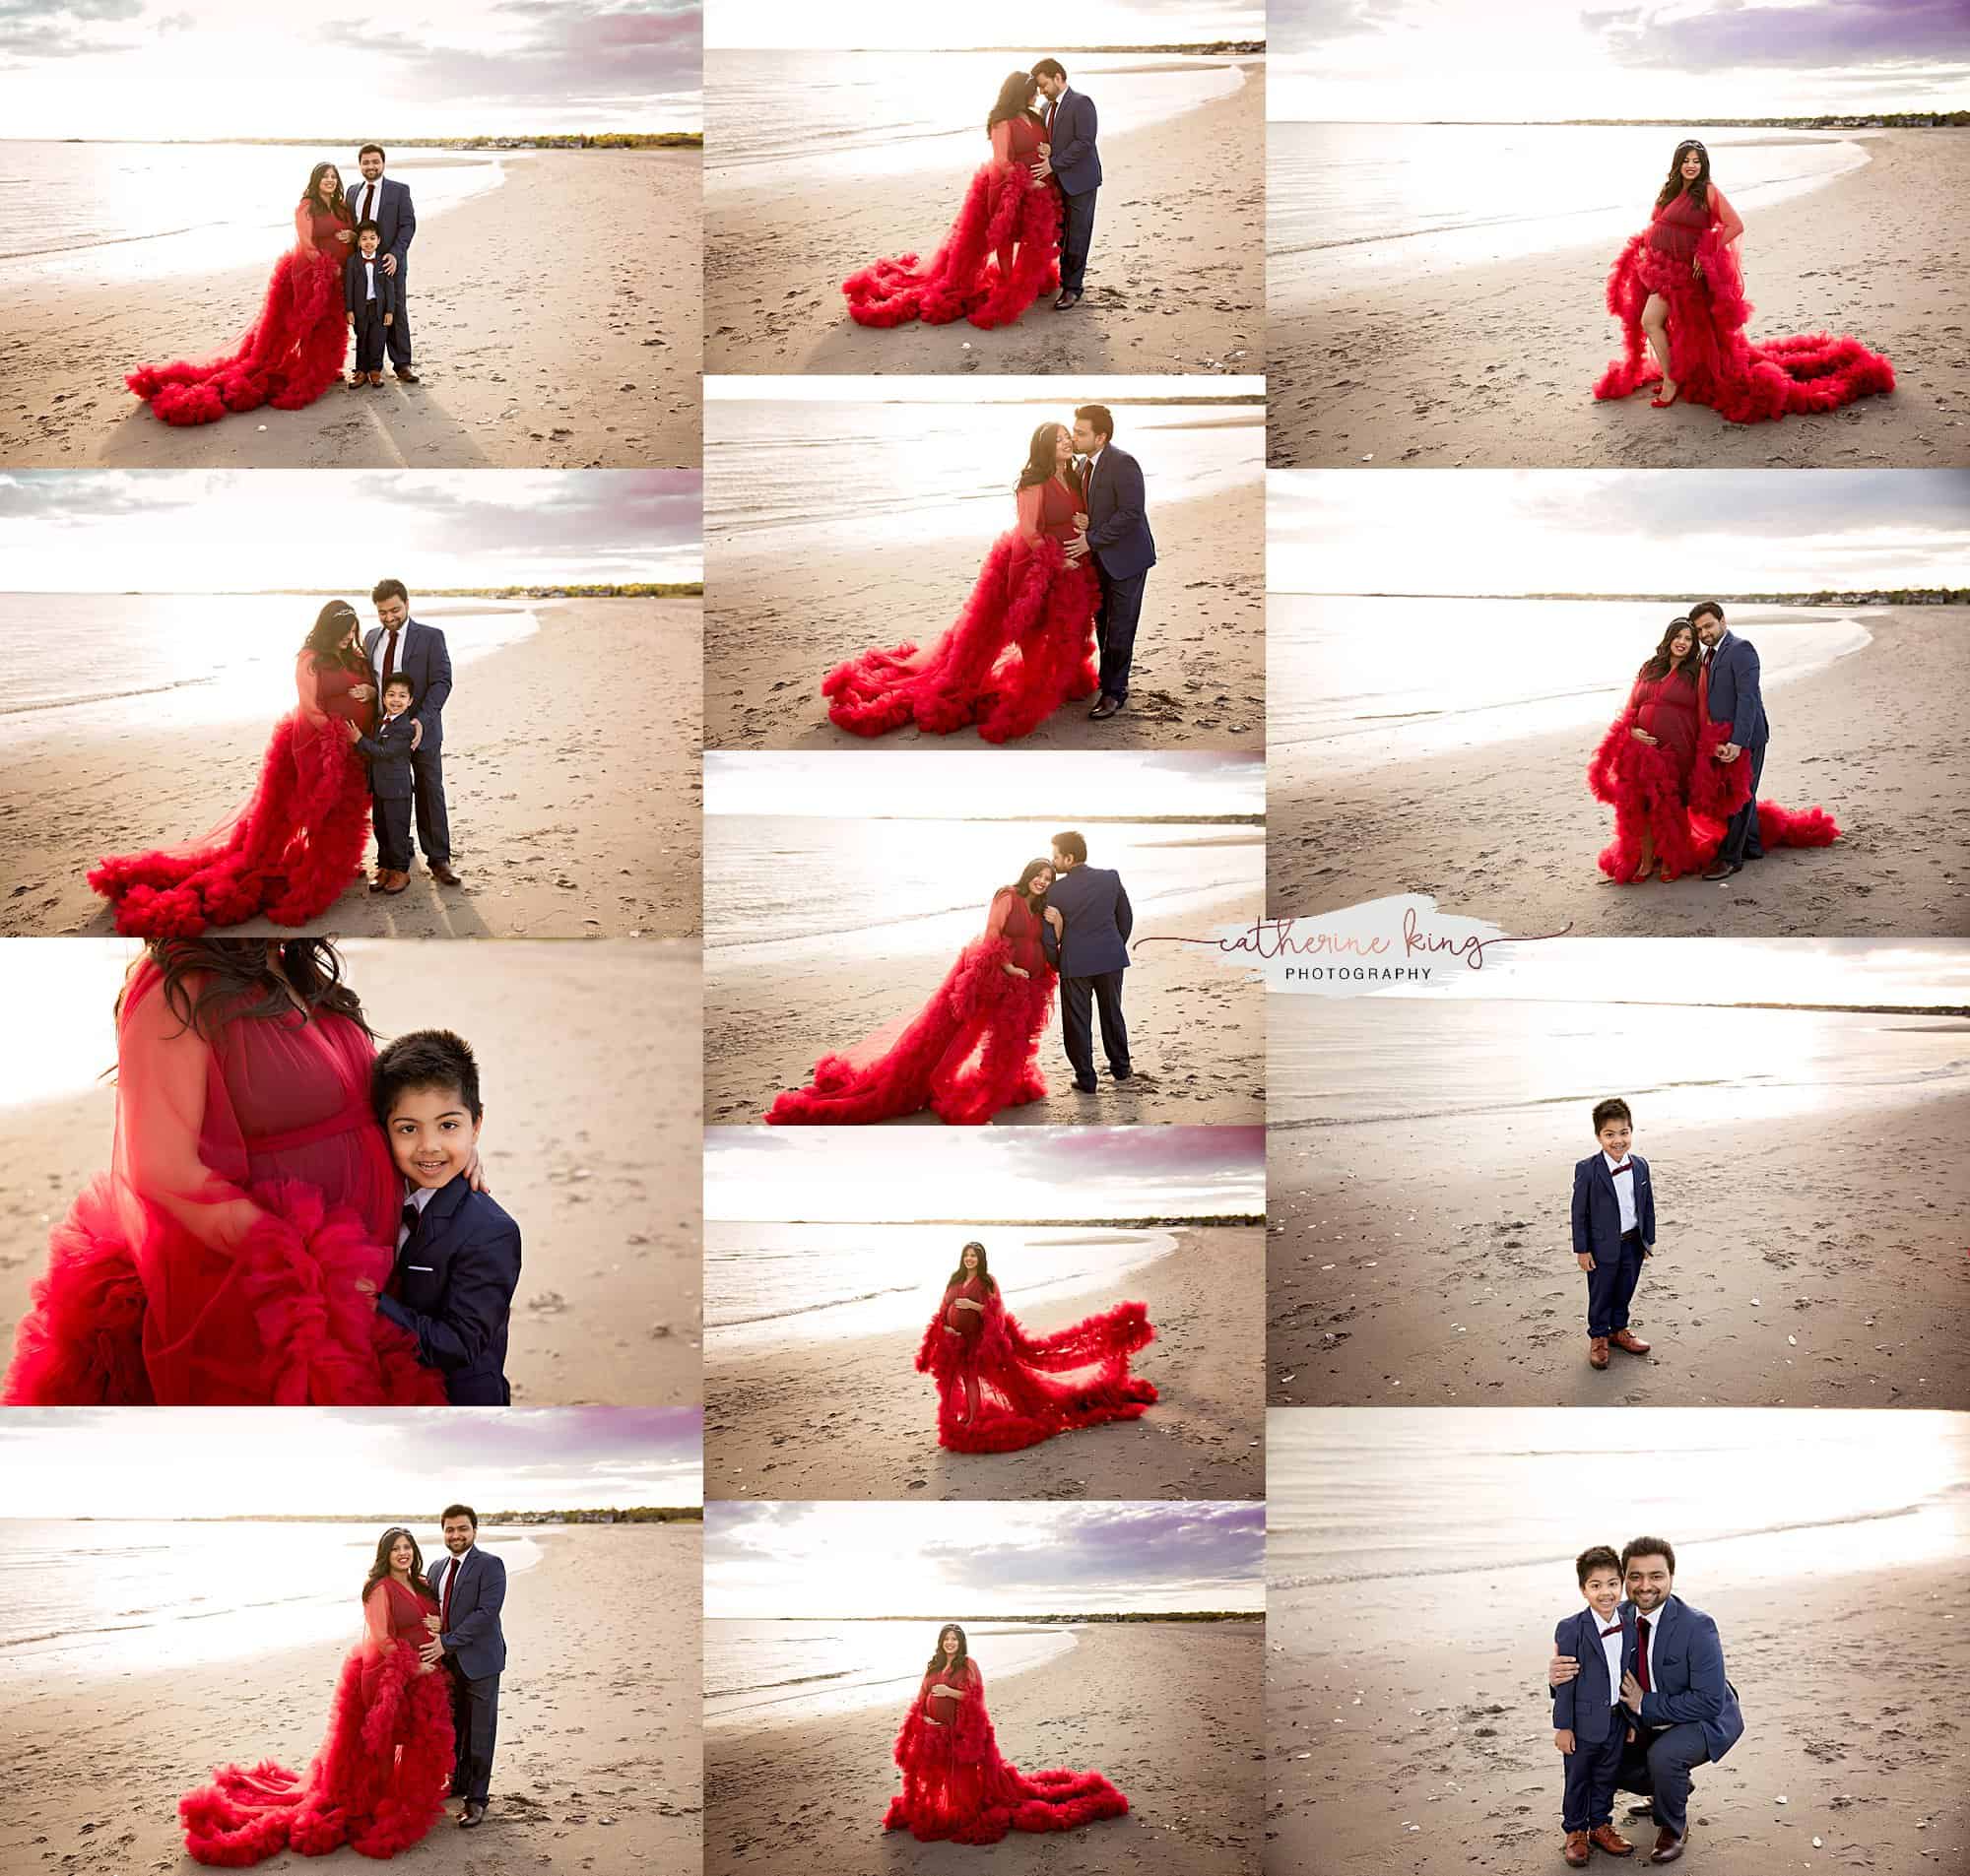 Stunning expecting mama in a red dress on the beach